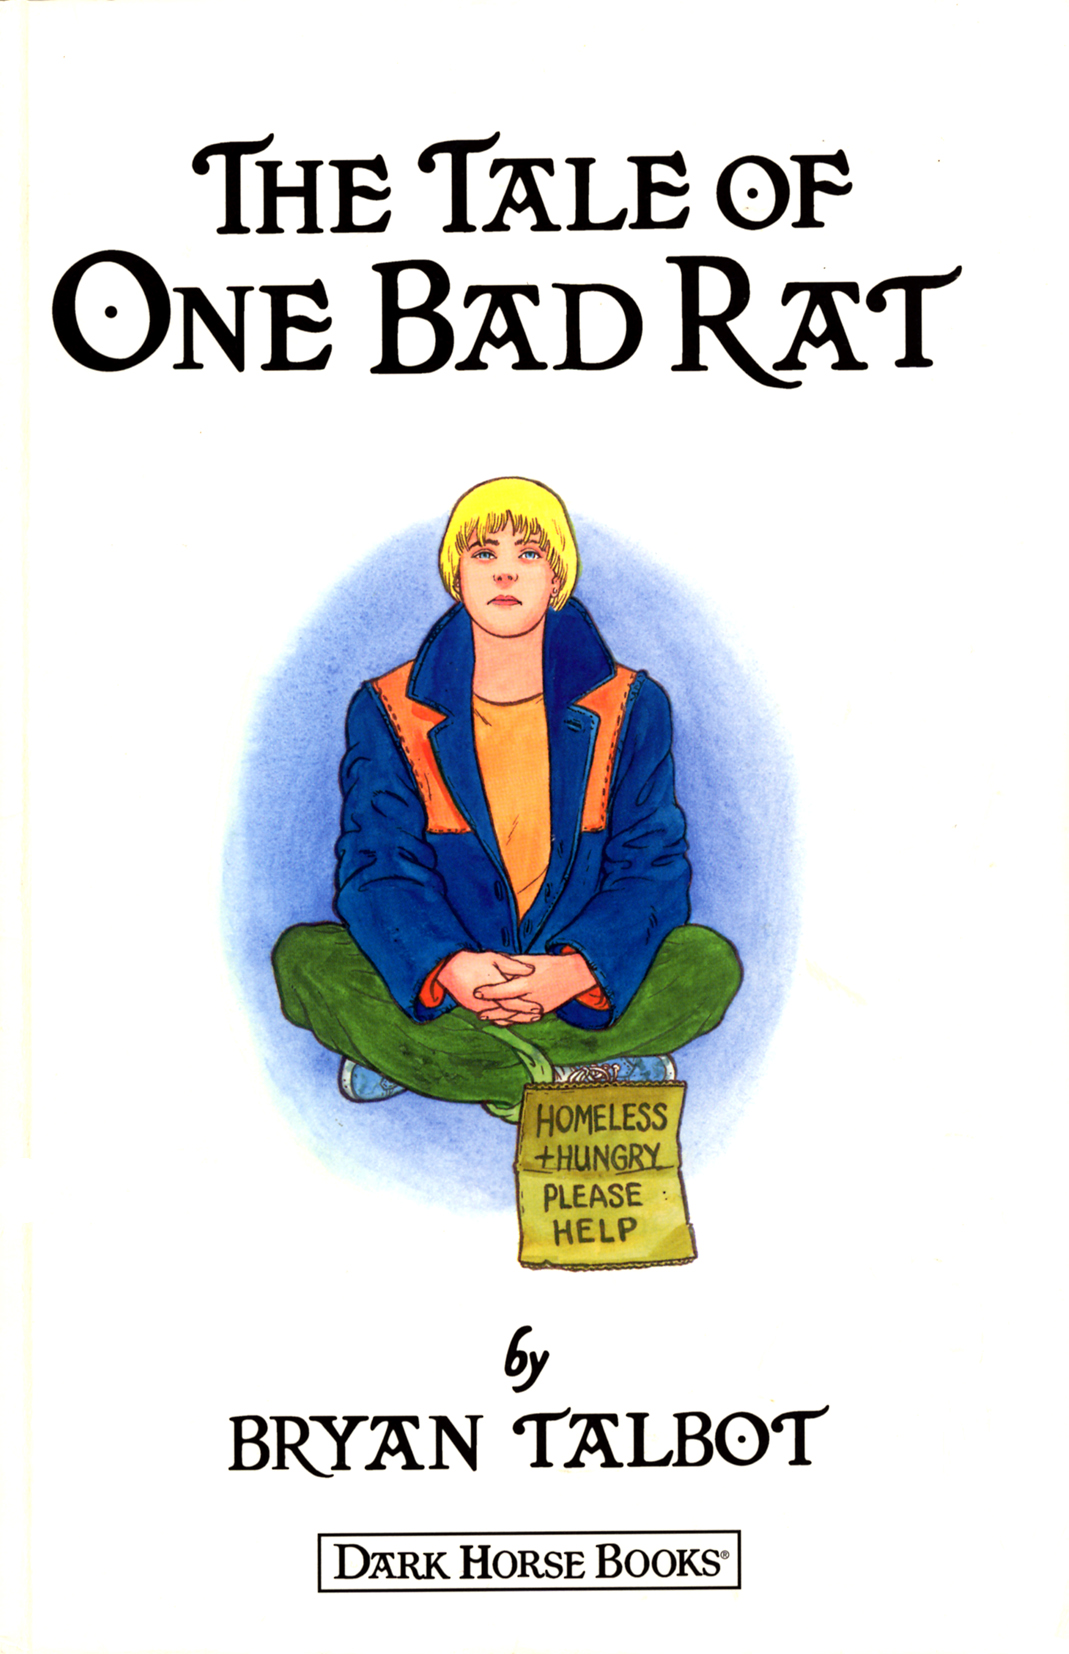 The Tale of One Bad Rat h/c